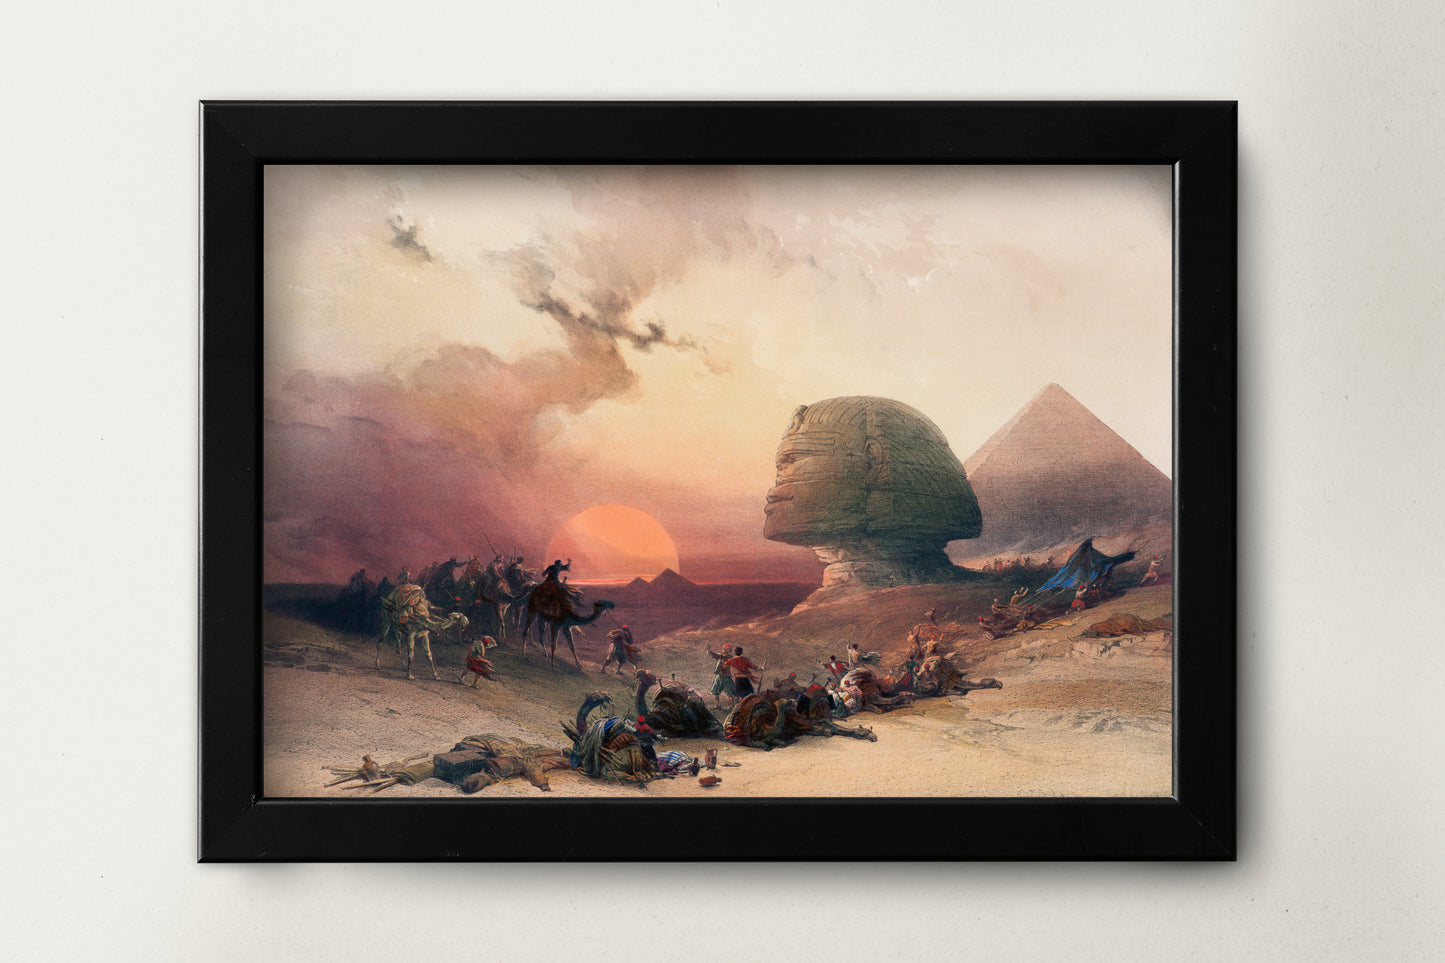 Approach of the simoom Desert of Gizeh by David Roberts (1796–1864) Art Poster Wall Hanging Decor